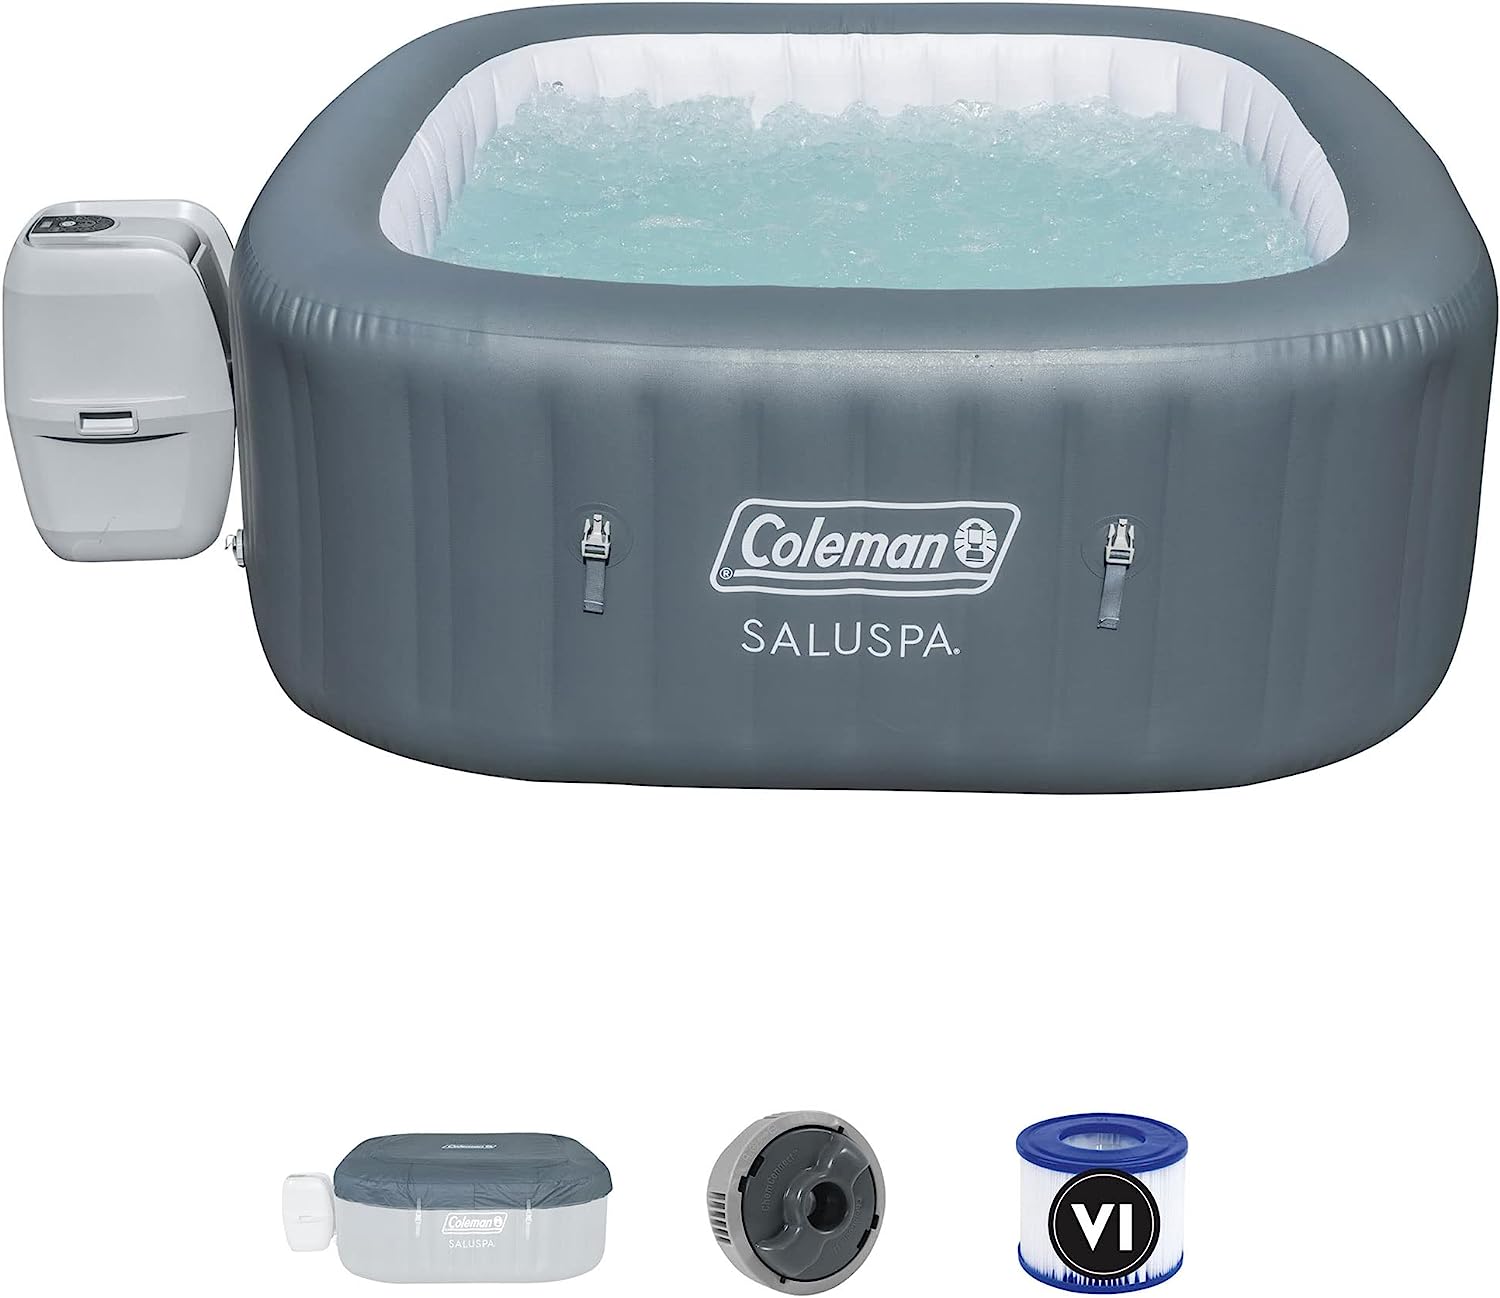 Coleman 15442-BW SaluSpa 4 Person Portable Inflatable [...]